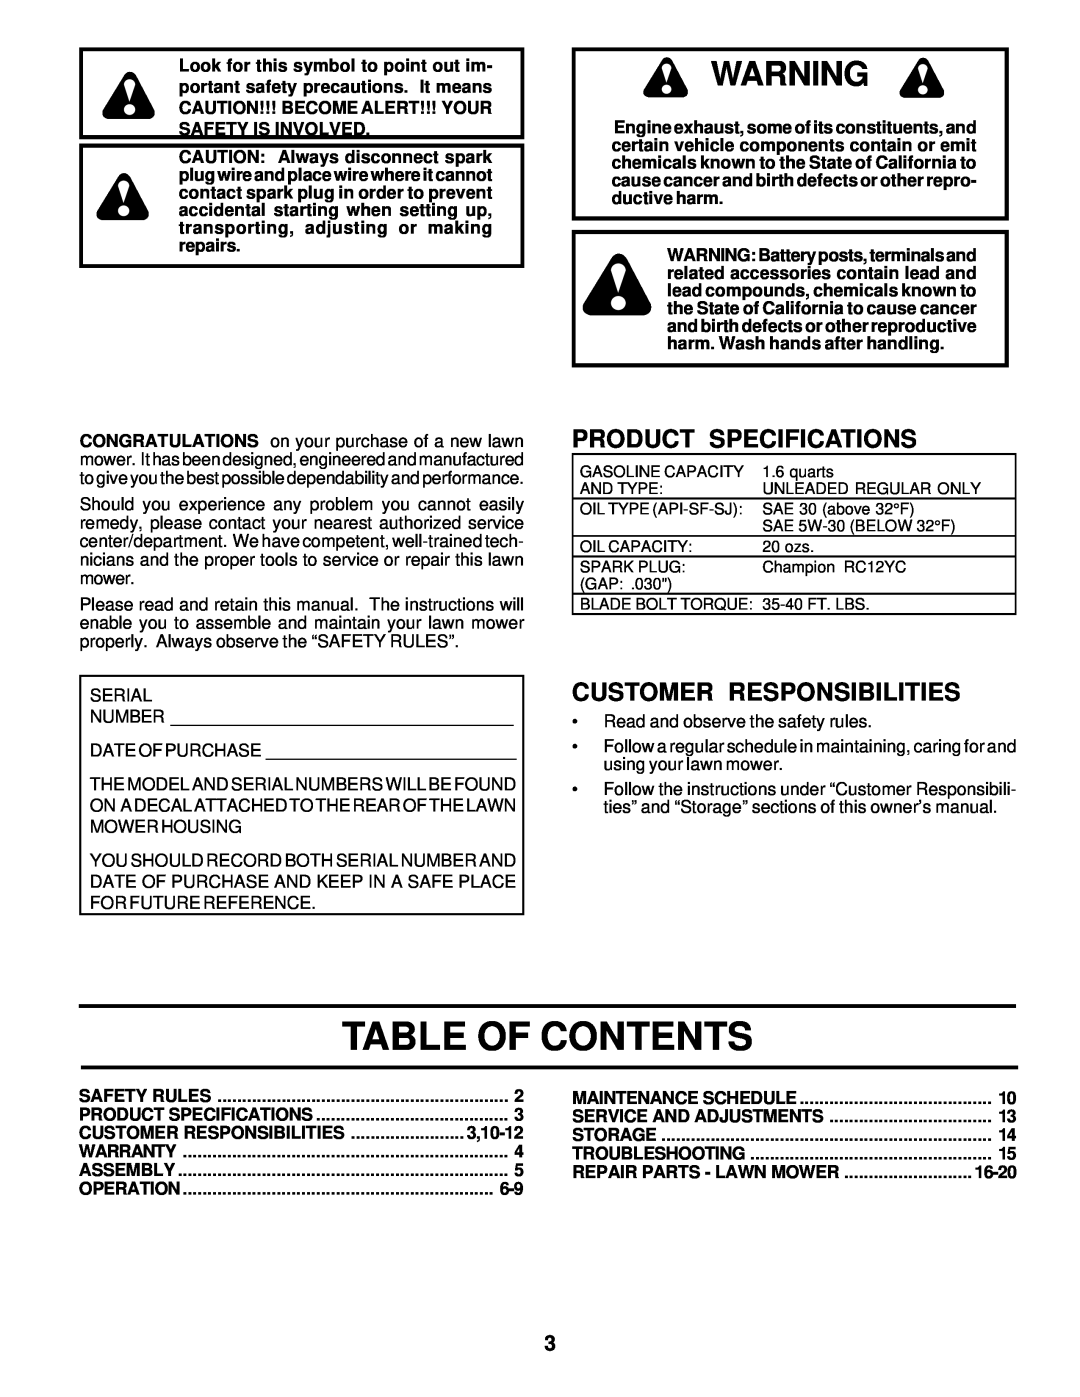 Husqvarna 6522CH owner manual Table Of Contents, Product Specifications, Customer Responsibilities, 3,10-12, 16-20 